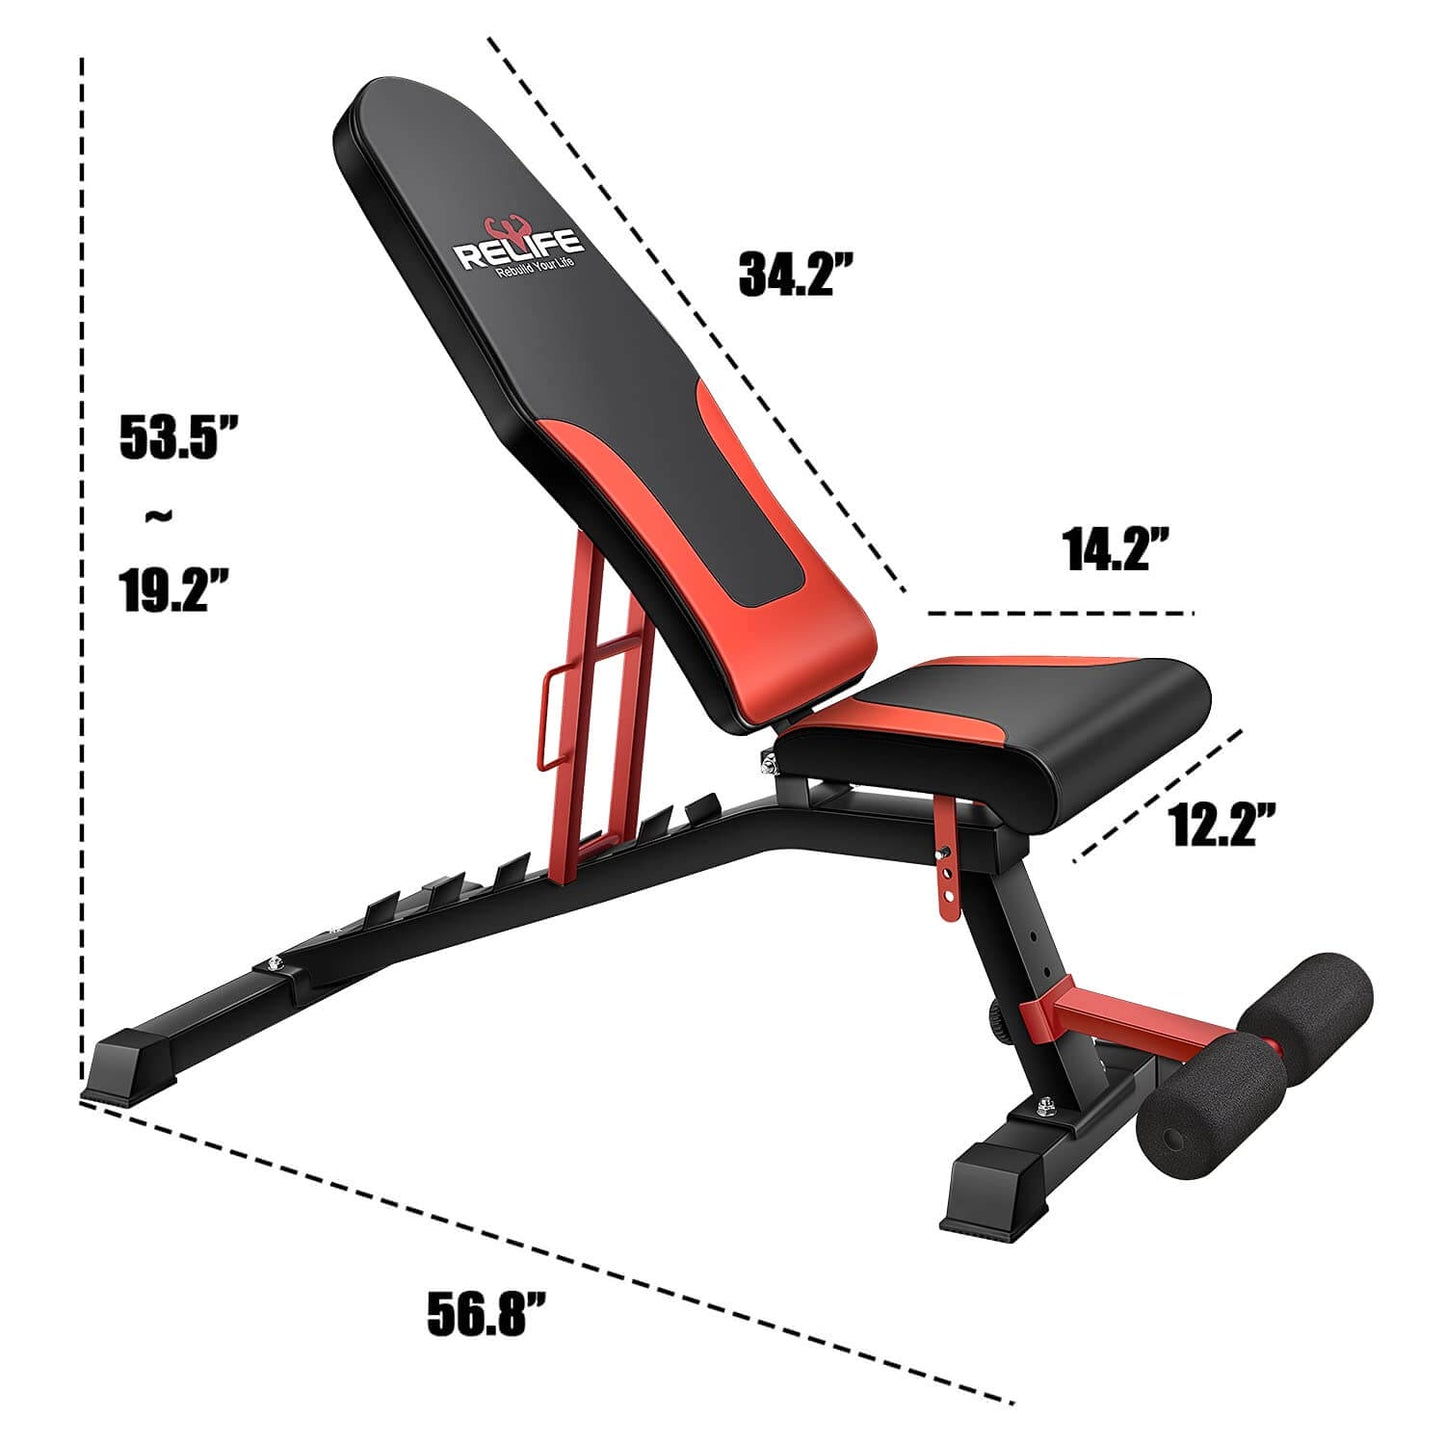 RELIFE REBUILD YOUR LIFE Workout Bench for Full Body Workout -   Vigbody